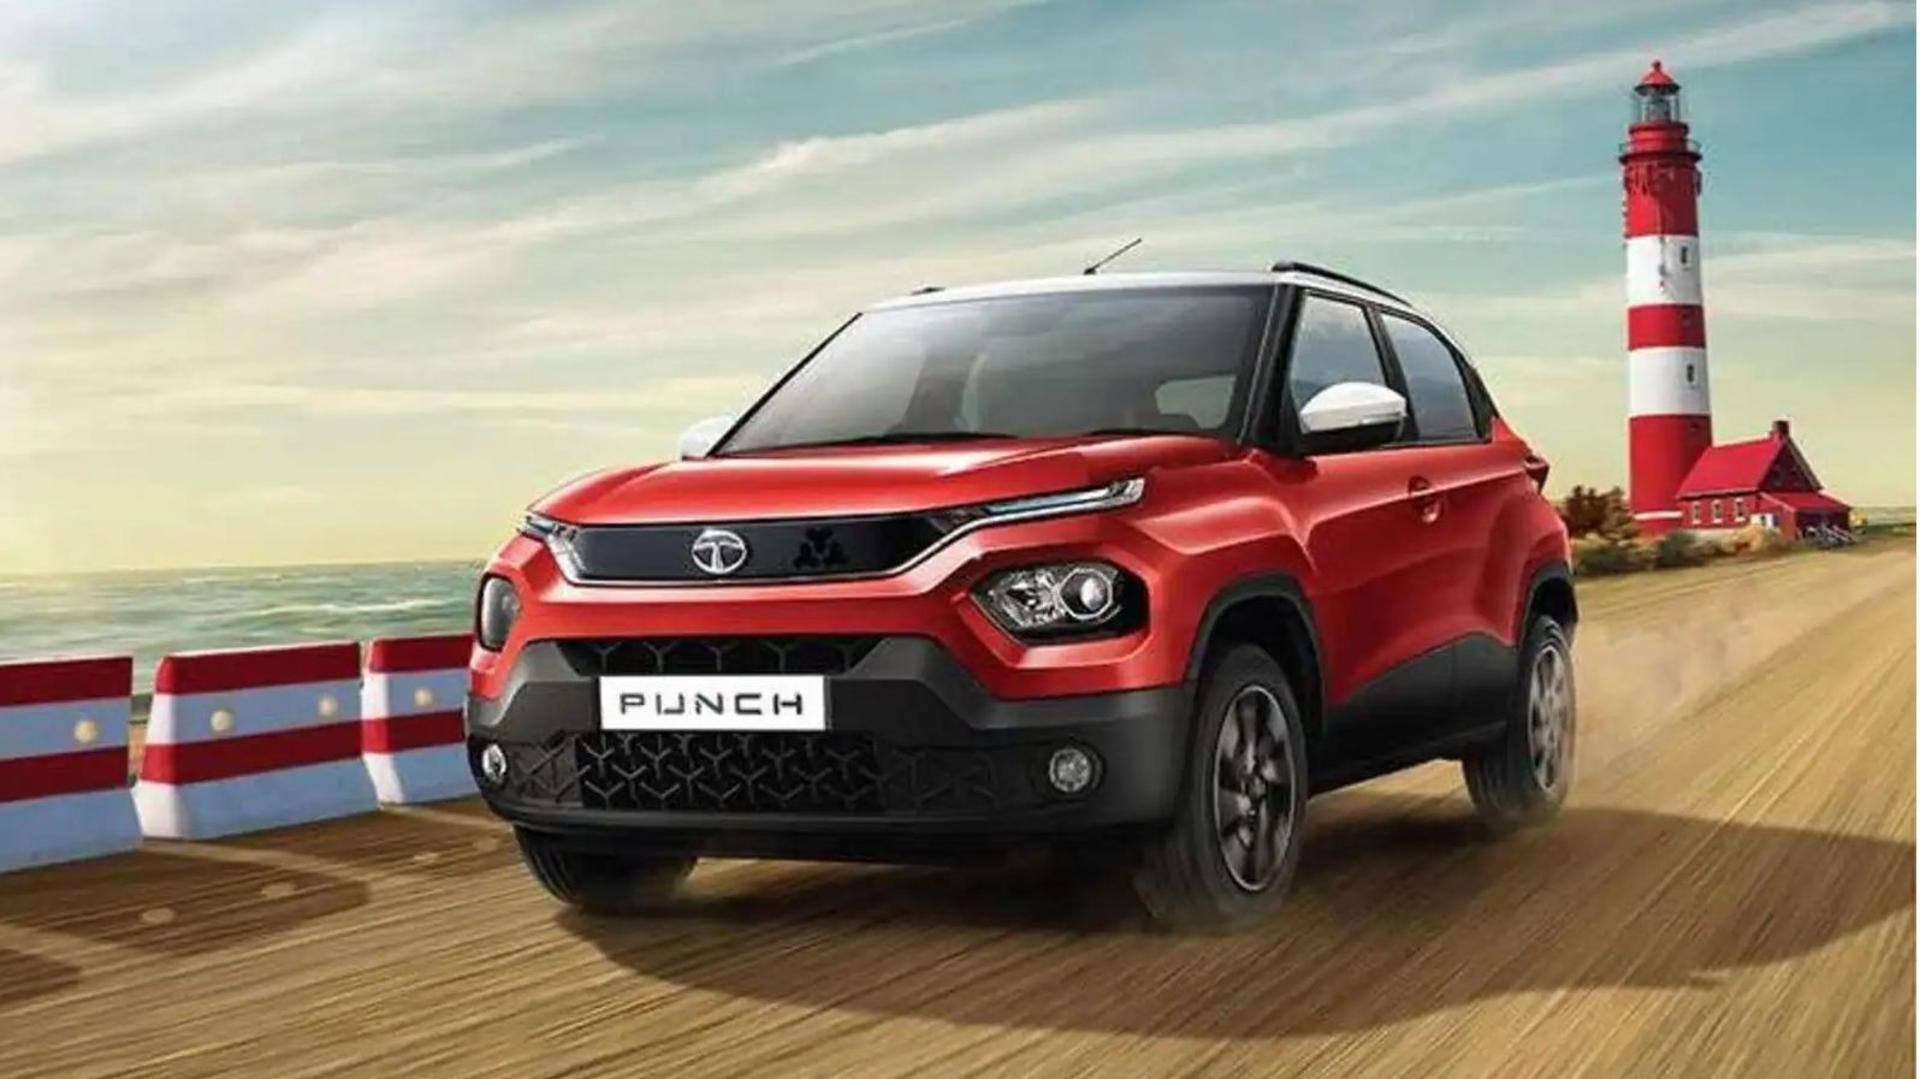 Tata Punch EV: Check design, features, and launch details